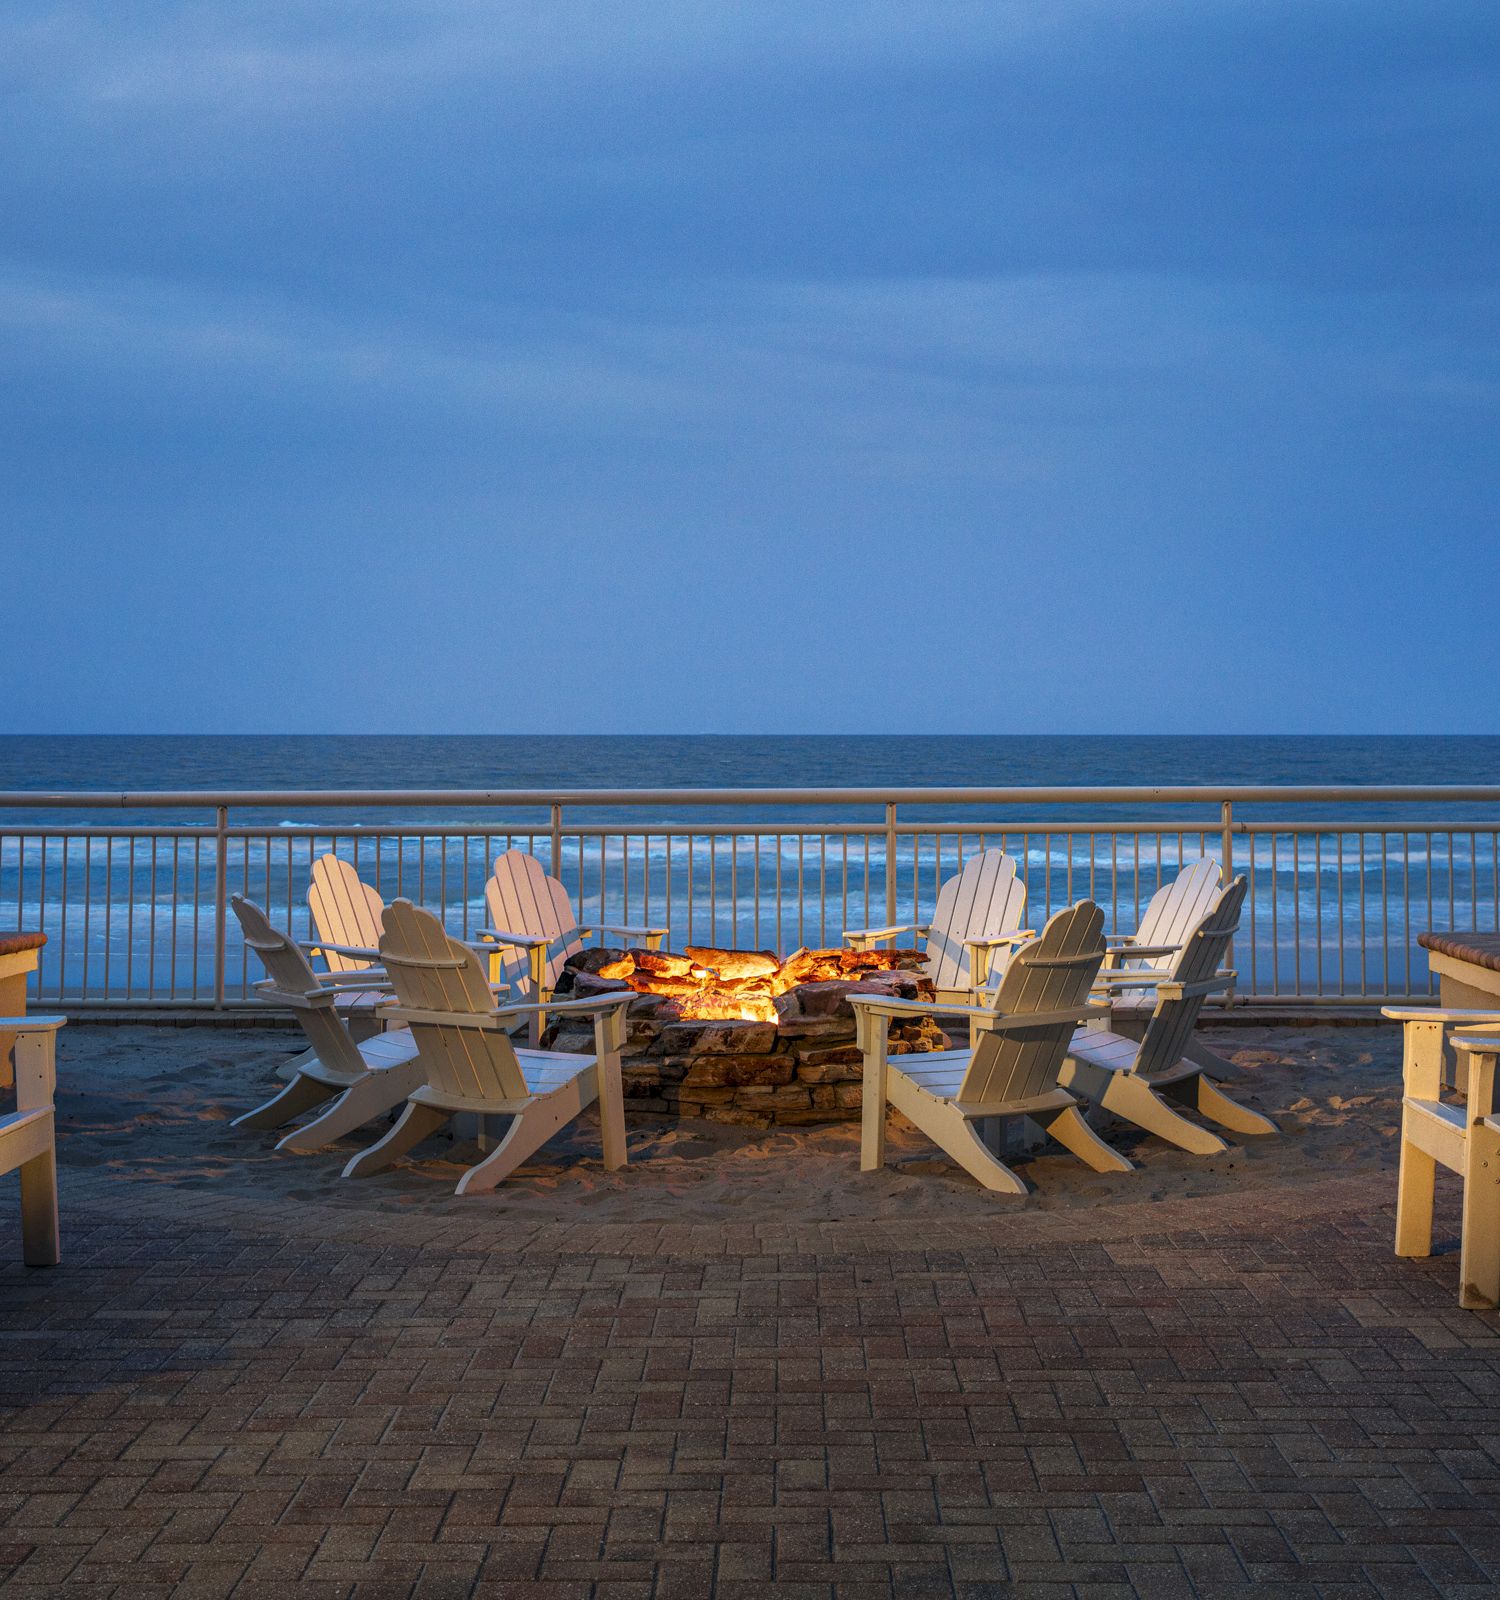 The image shows a cozy beach setting with white Adirondack chairs arranged around a lit fire pit, flanked by two palm trees, overlooking the ocean.